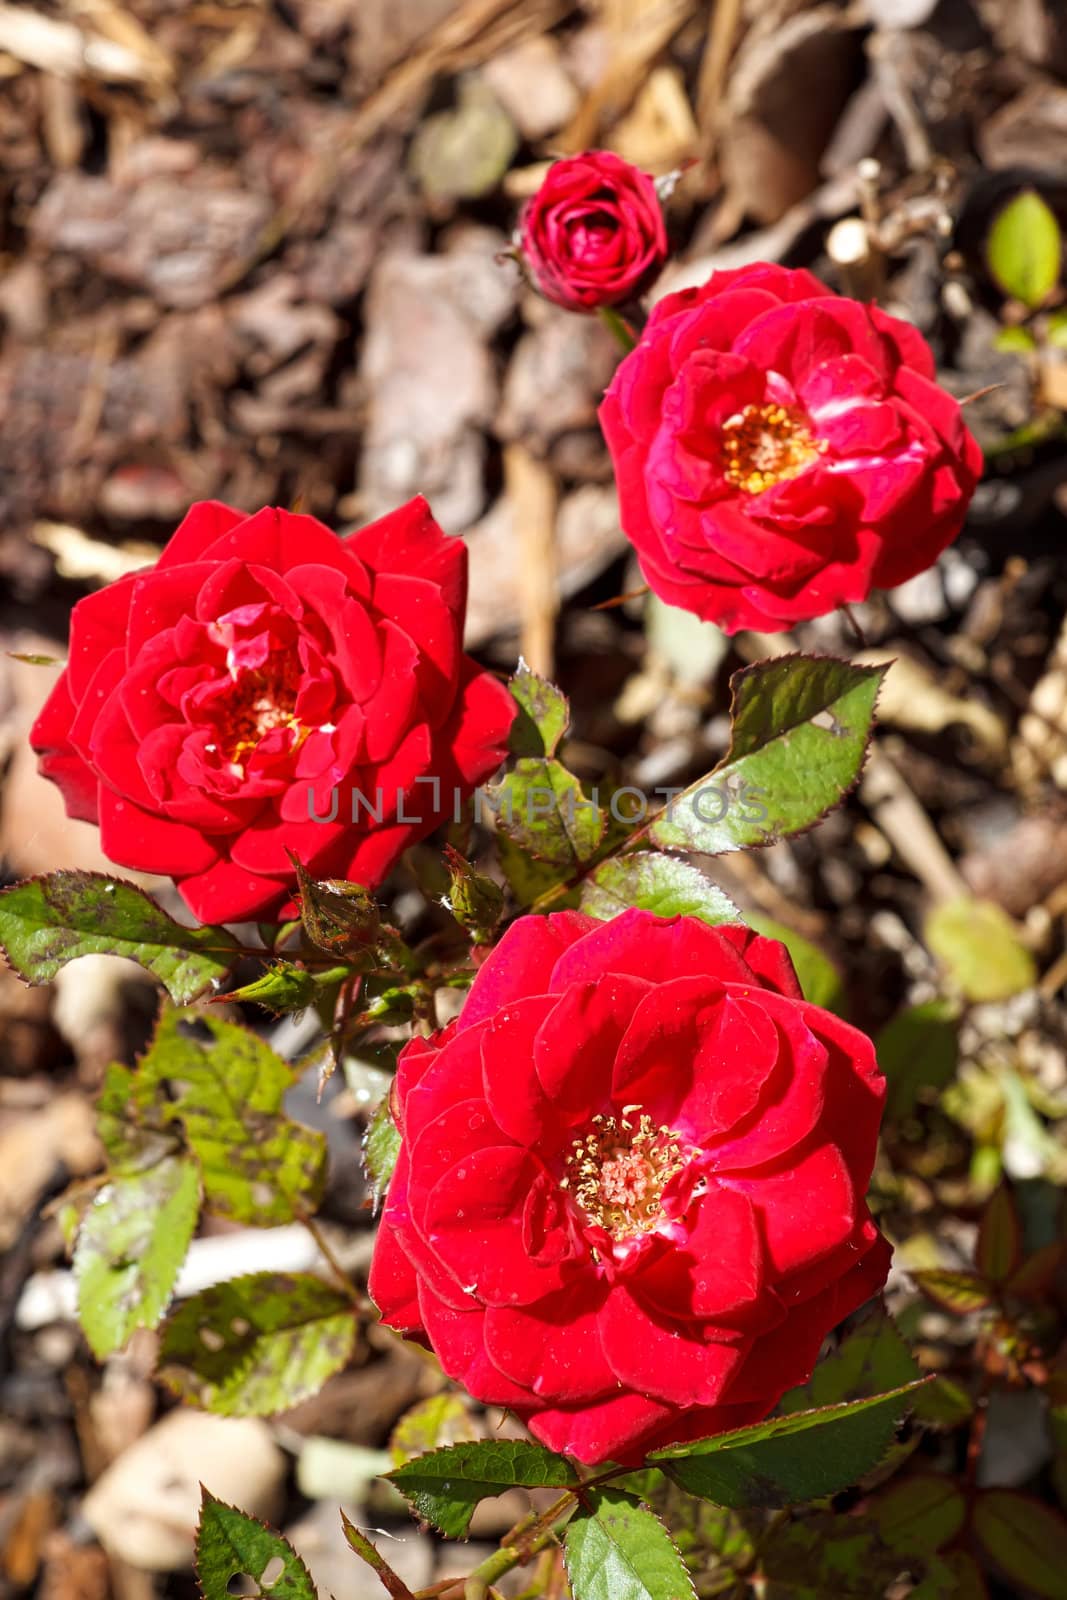 Four small red roses by artush